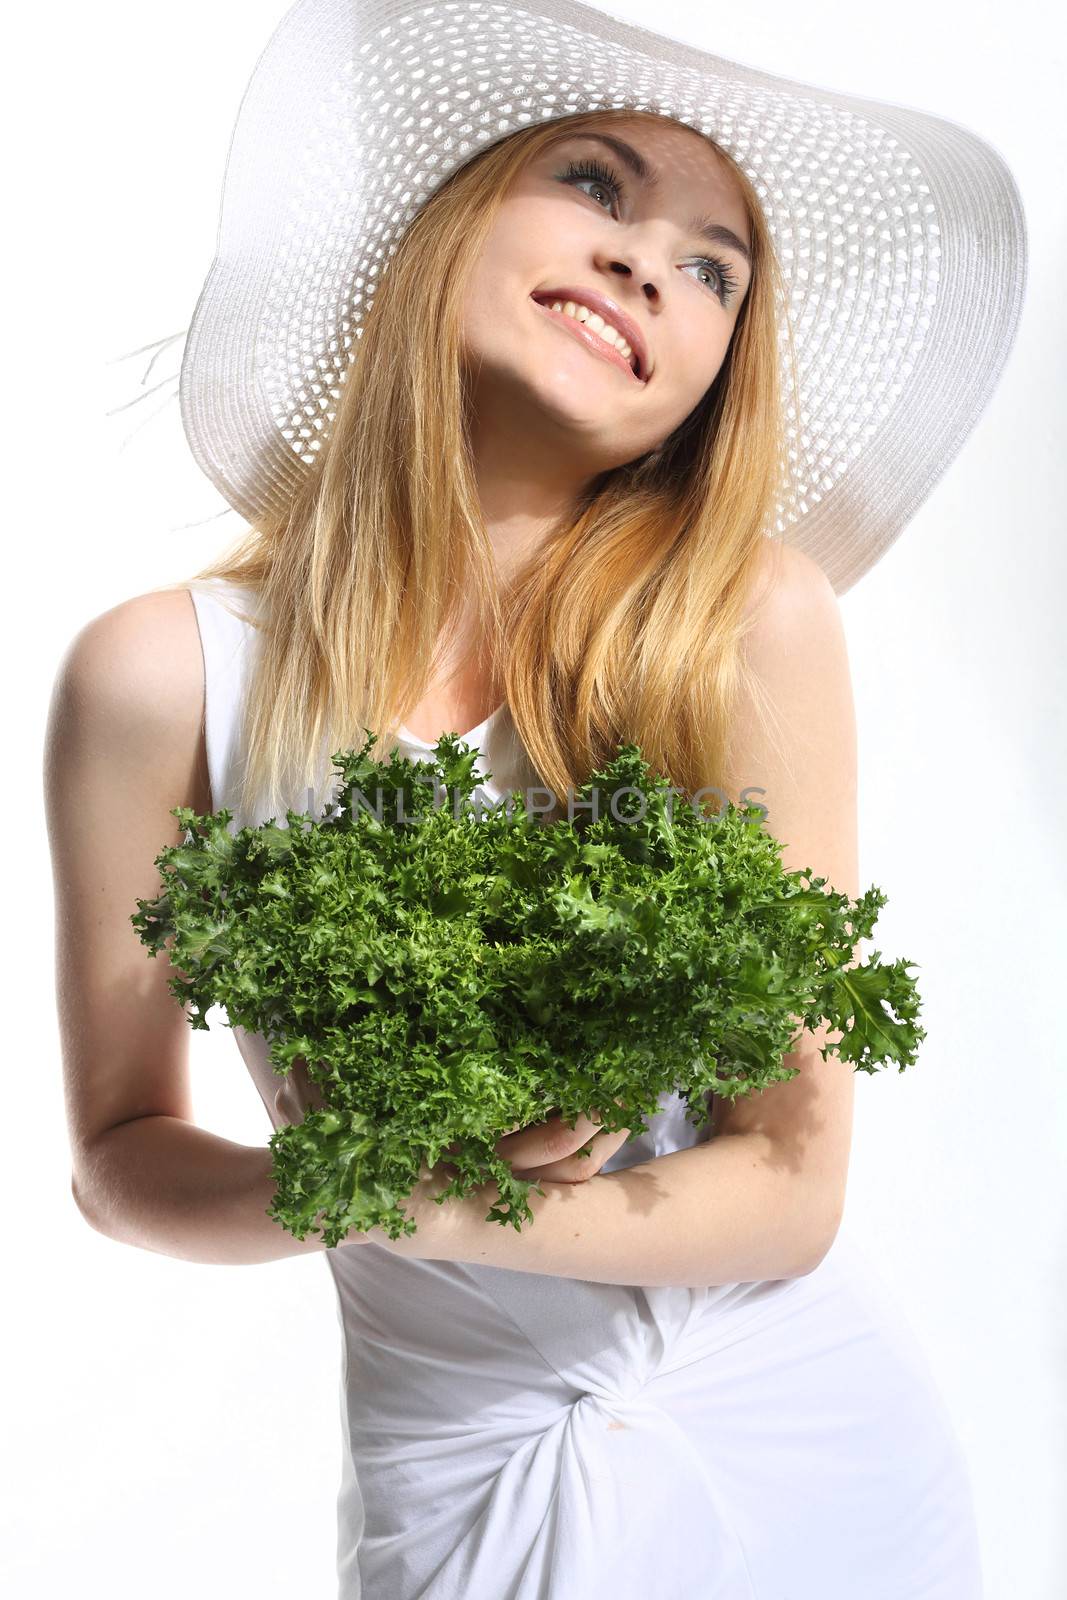 Woman with green salad leaves